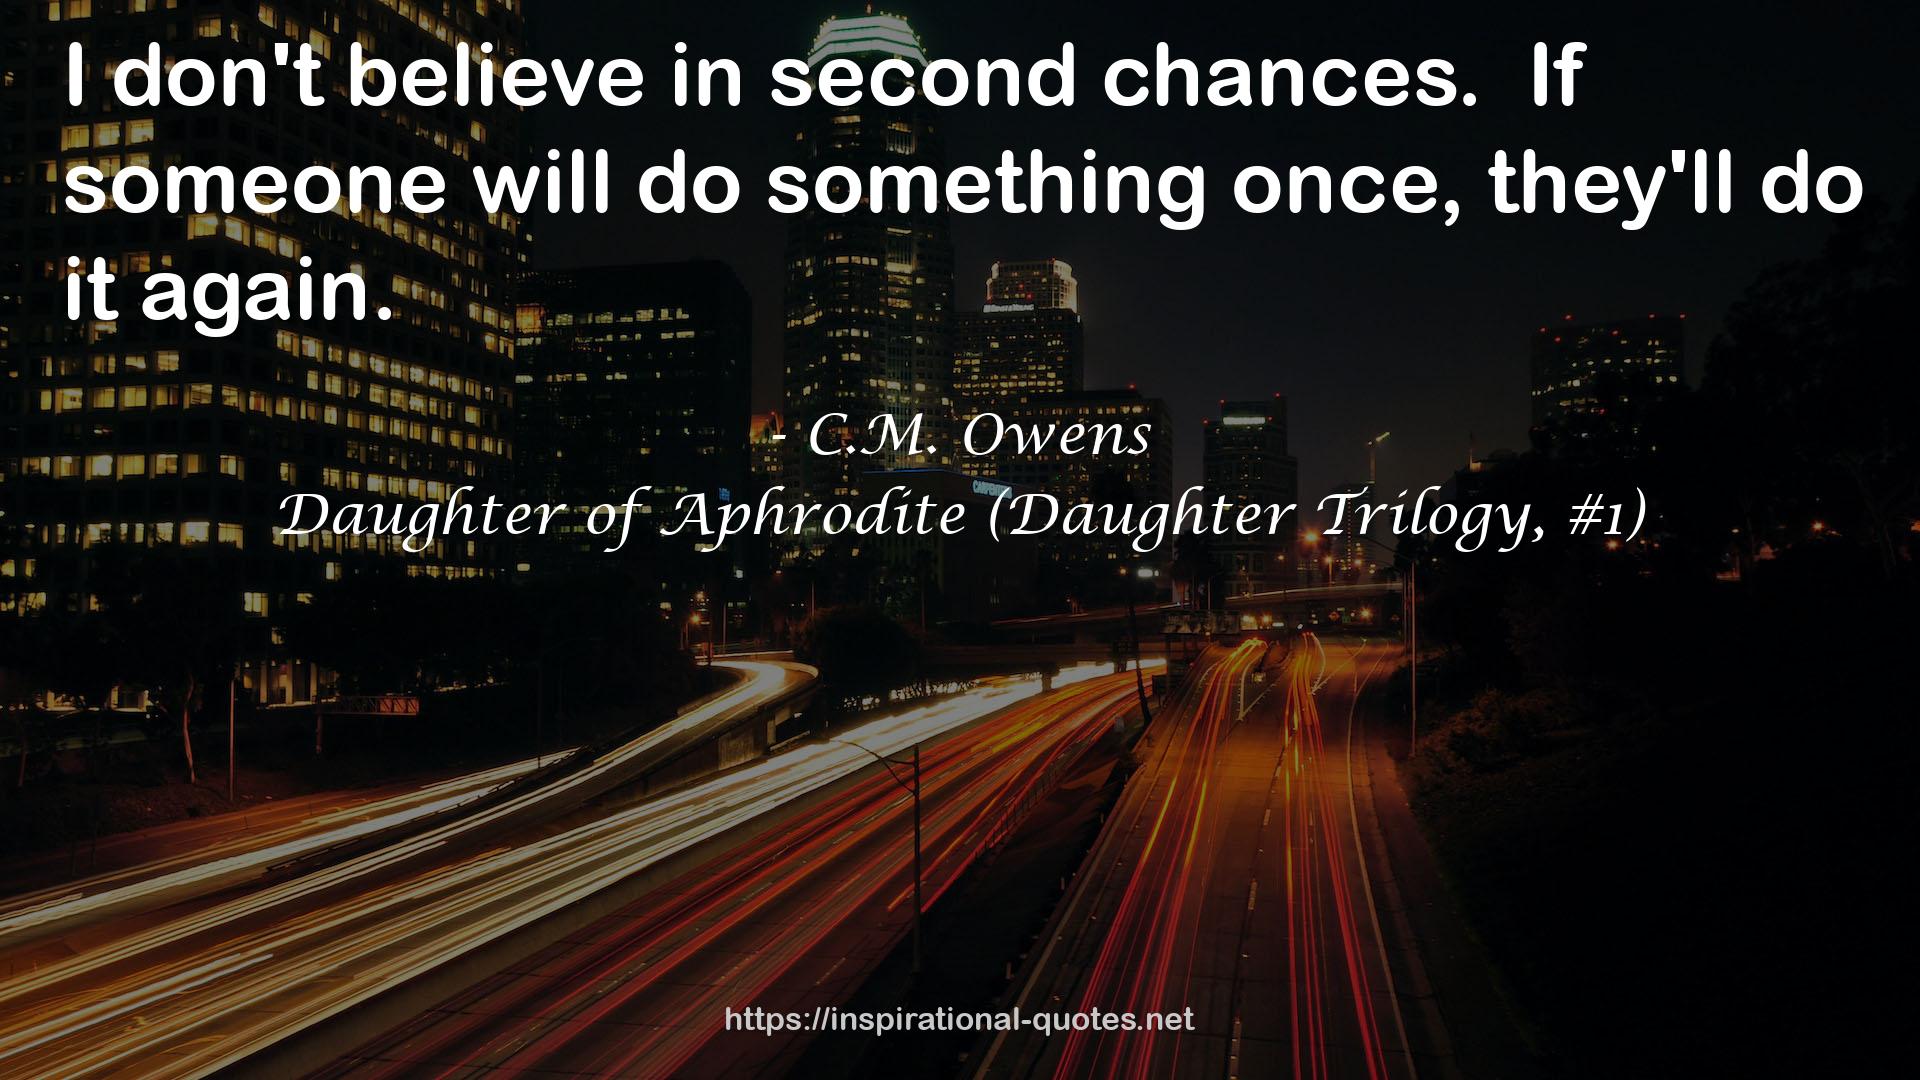 Daughter of Aphrodite (Daughter Trilogy, #1) QUOTES